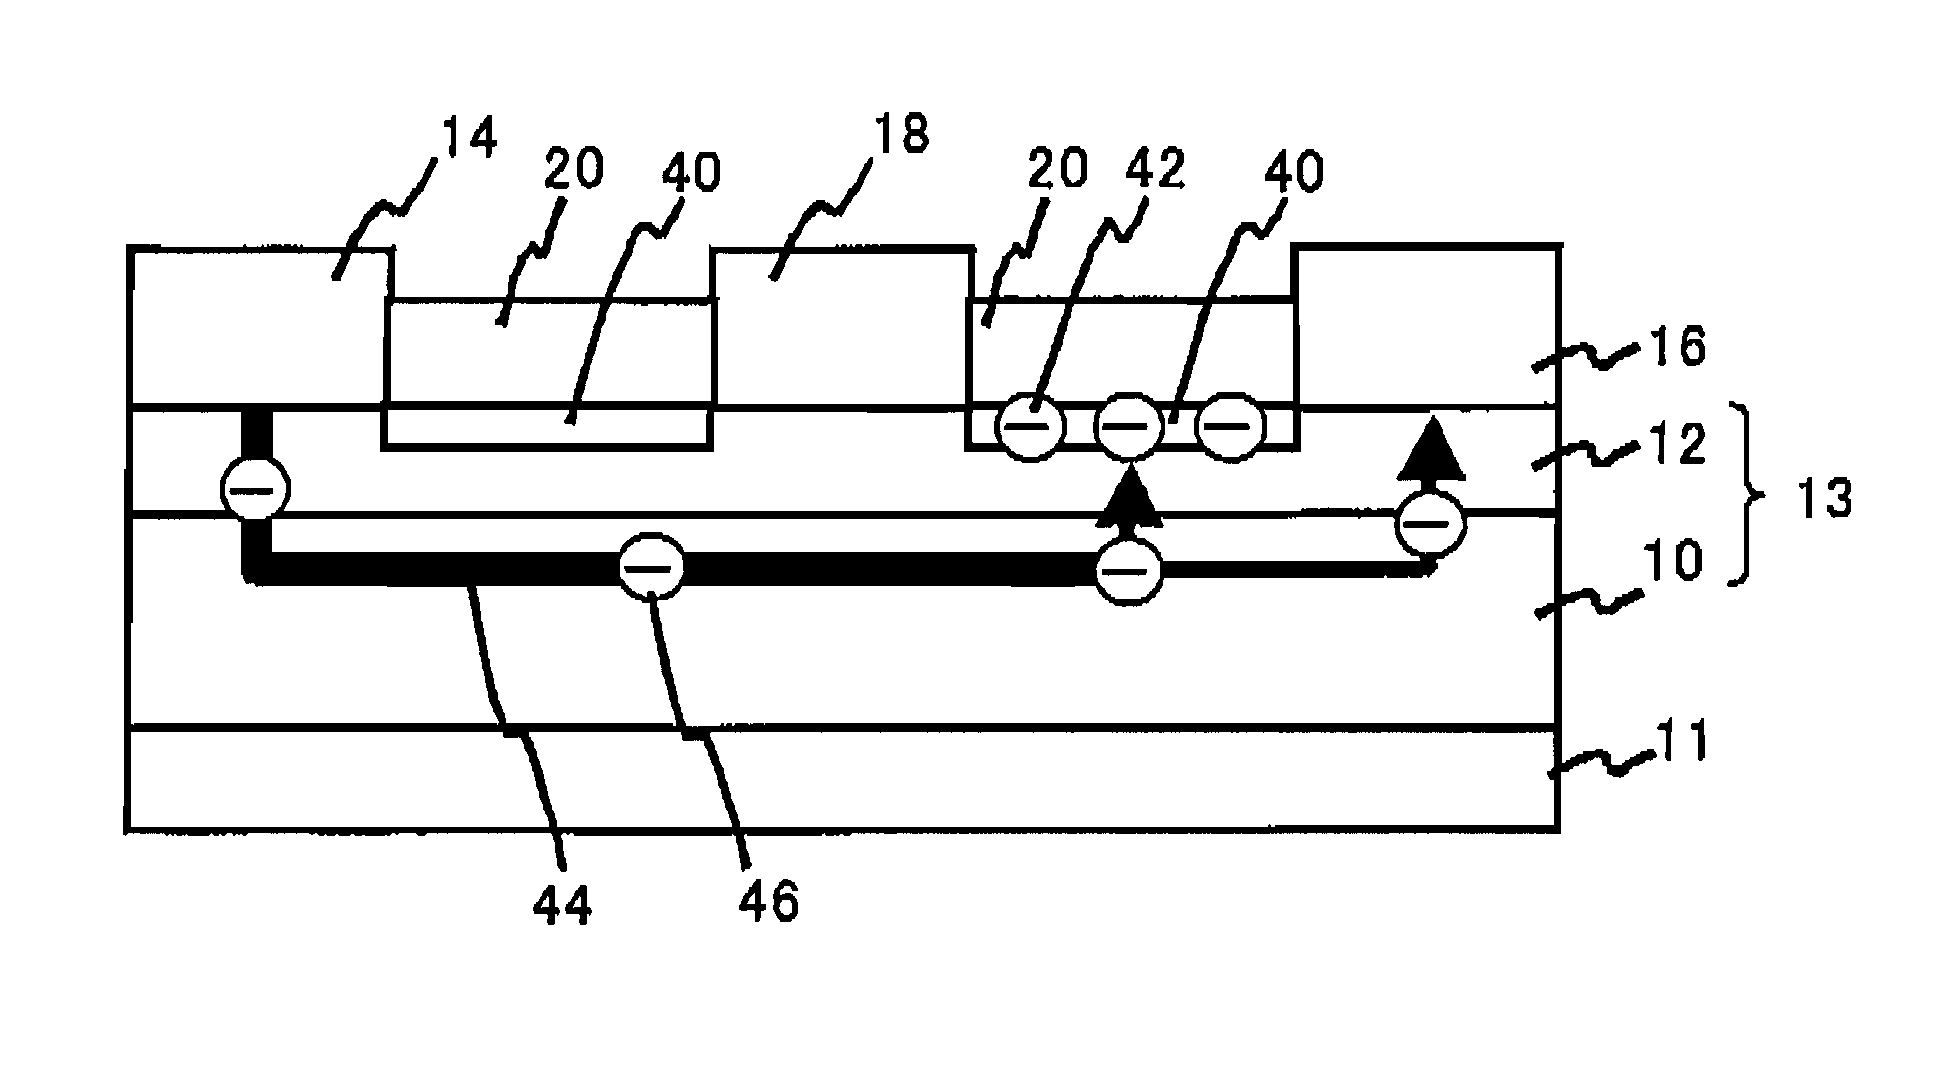 Semiconductor device having GaN-based semiconductor layer and select composition ratio insulating film